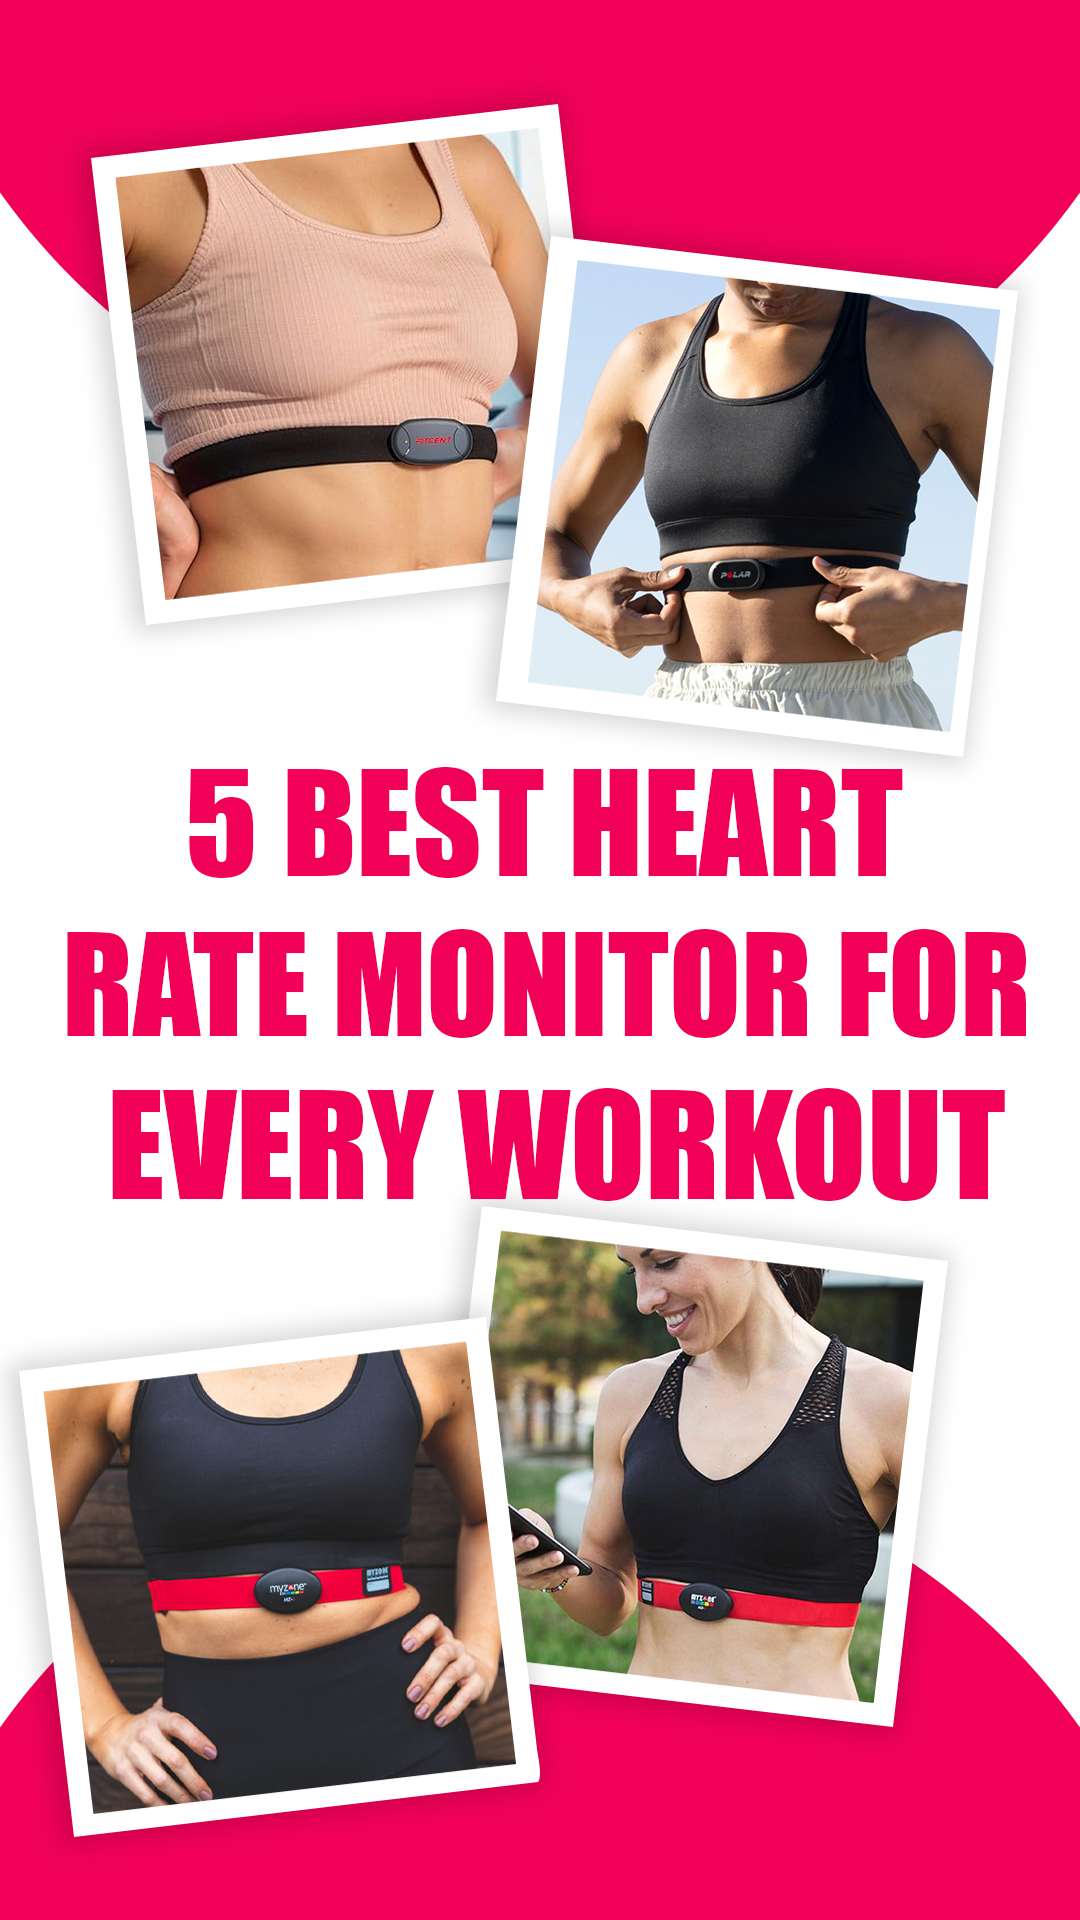 5 Best Heart Rate Monitors for Workout, Exercise and Fitness